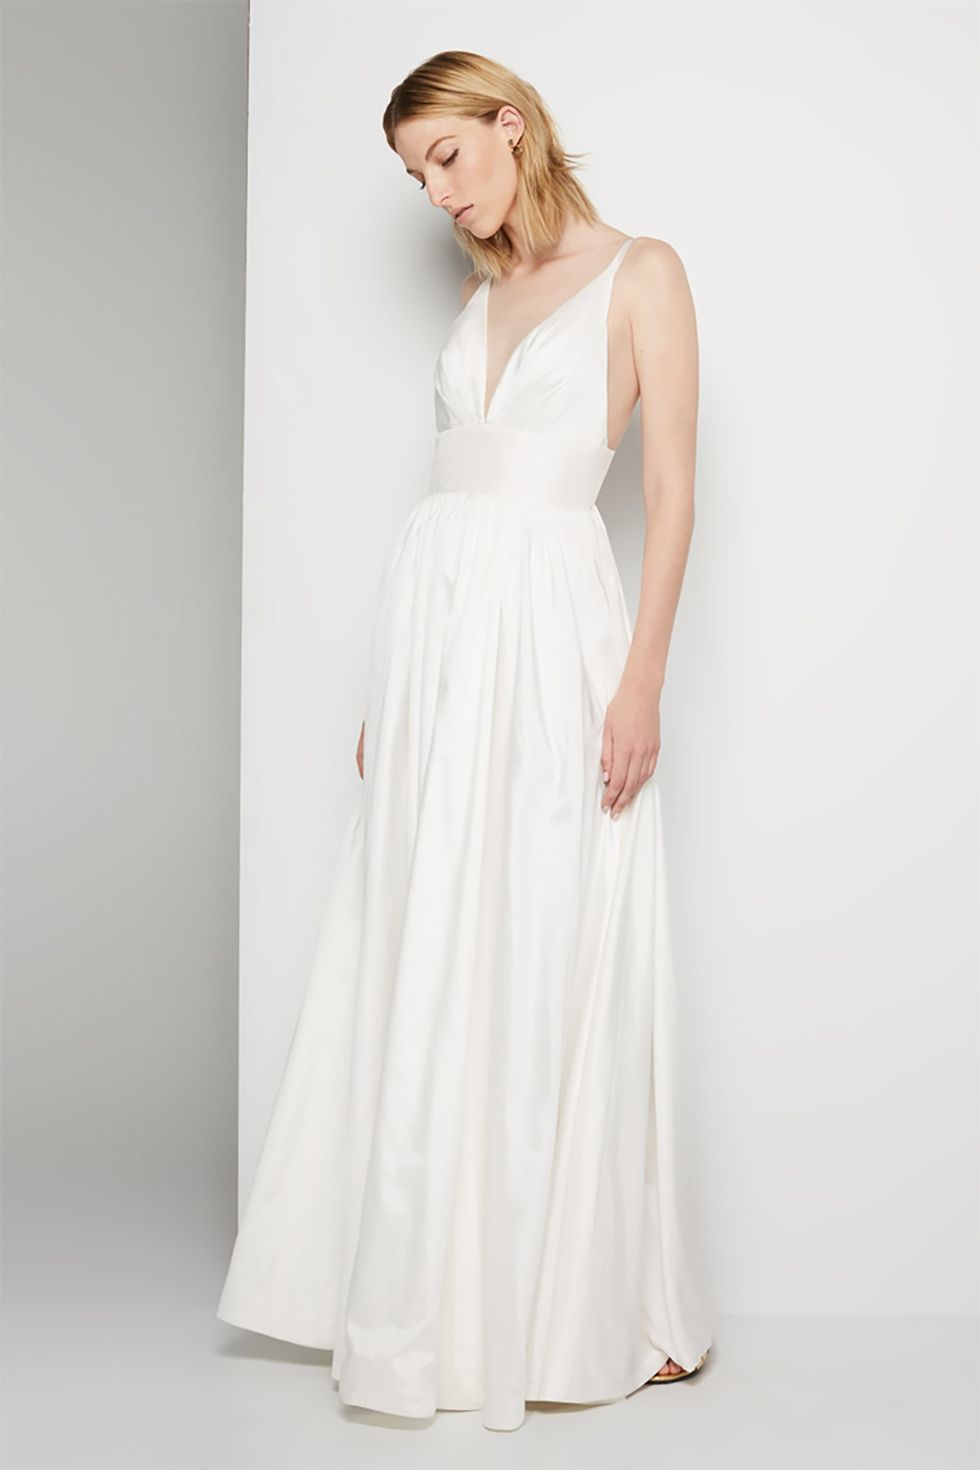 <p>You might've looked into the online retailer because they let you pick out colors and customize necklines and skirts. They do that for their newly launched wedding category too, which includes this ultra-flattering spaghetti-strap number.&nbsp;</p><p>$239, <a href="https://www.fameandpartners.com/dresses/dress-astrid-814?color=white" target="_blank" data-tracking-id="recirc-text-link">fameandpartners.com</a>.</p>